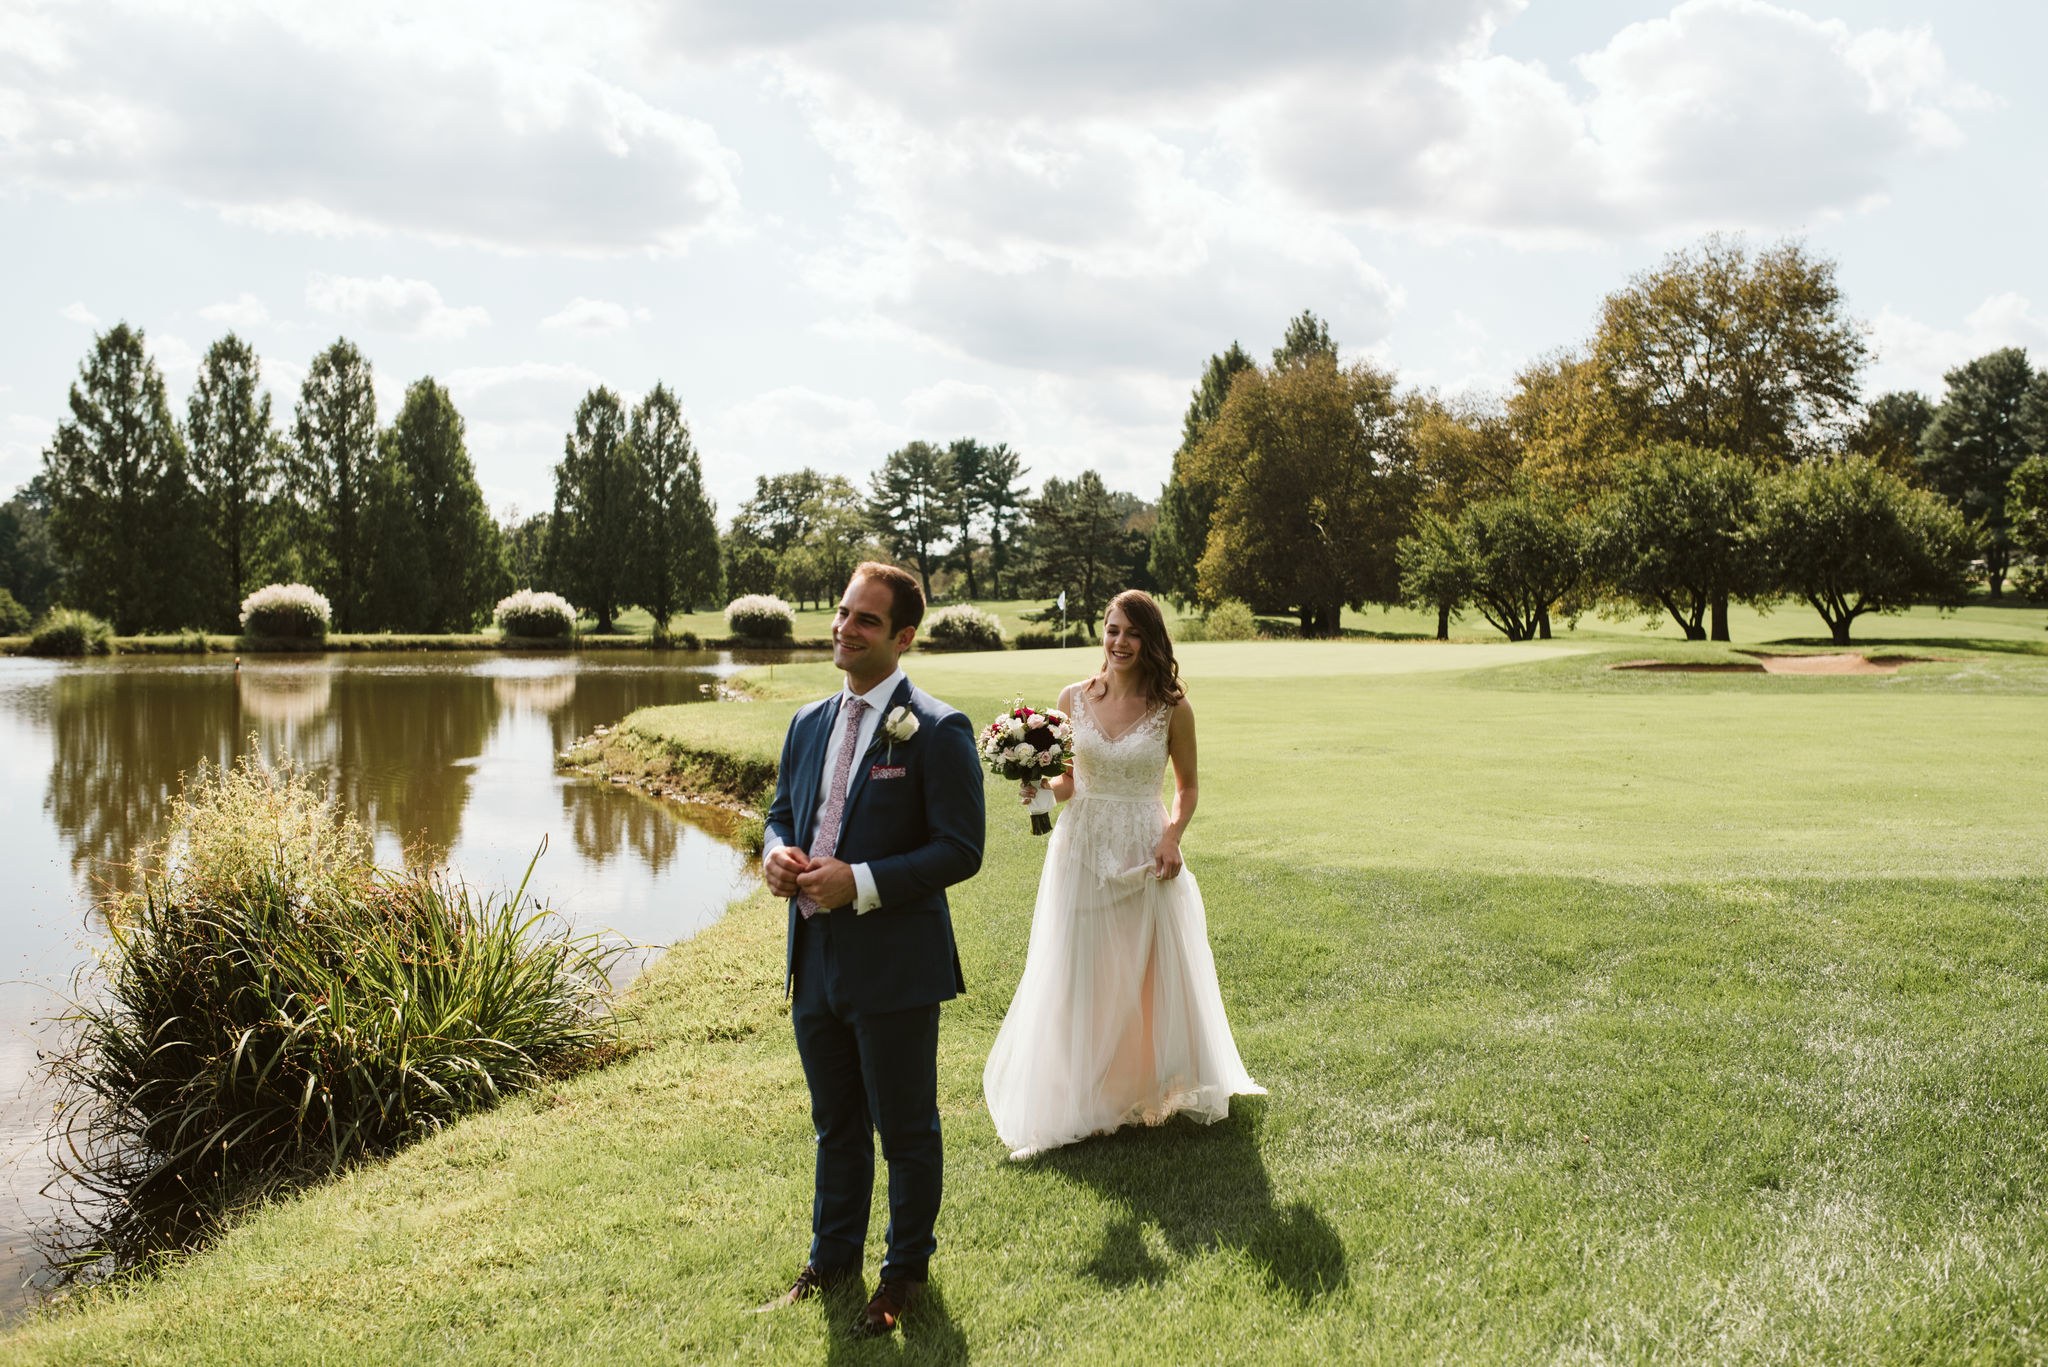  Phoenix Maryland, Baltimore Wedding Photographer, Eagle’s Nest Country Club, Classic, Romantic, Outdoor, BHLDN Dress, Knotty Tie, Bride and Groom during First Look 